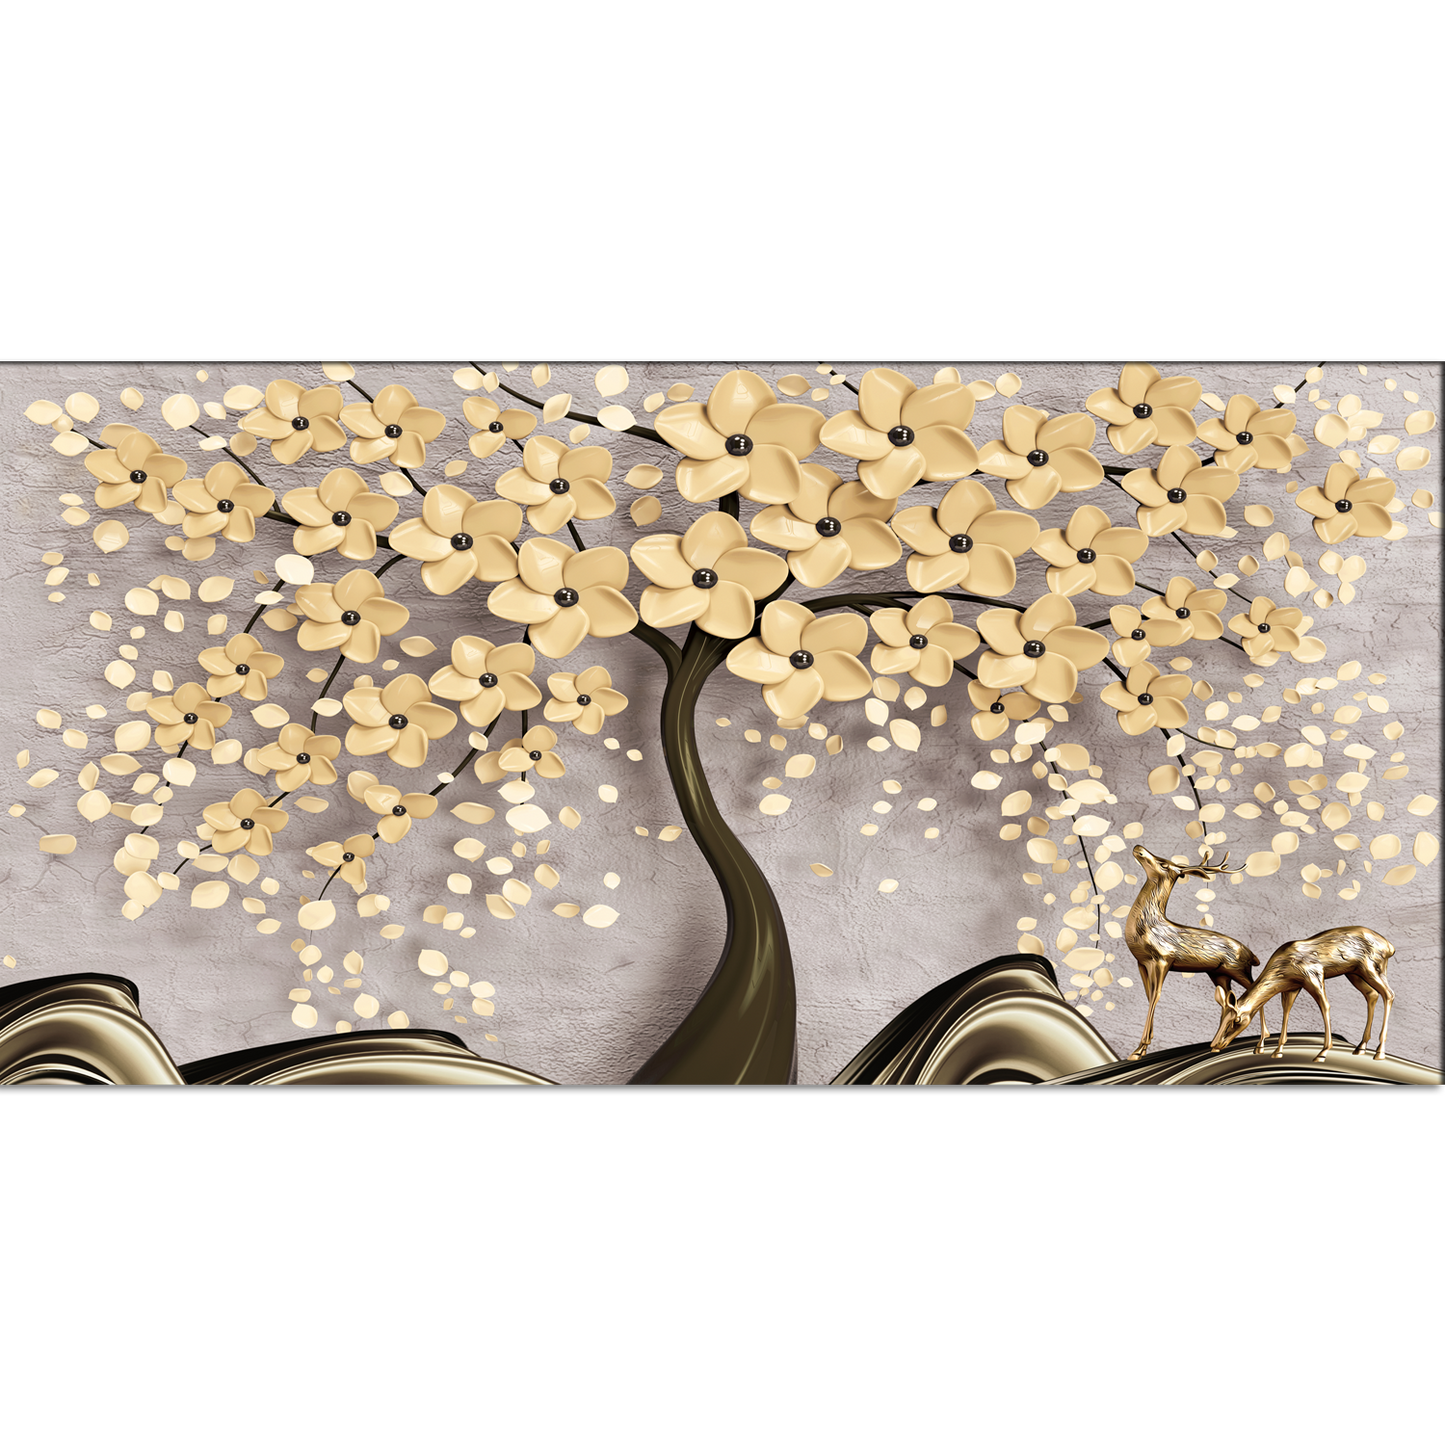 Beautiful Tree With Golden Flower Canvas Wall Painting